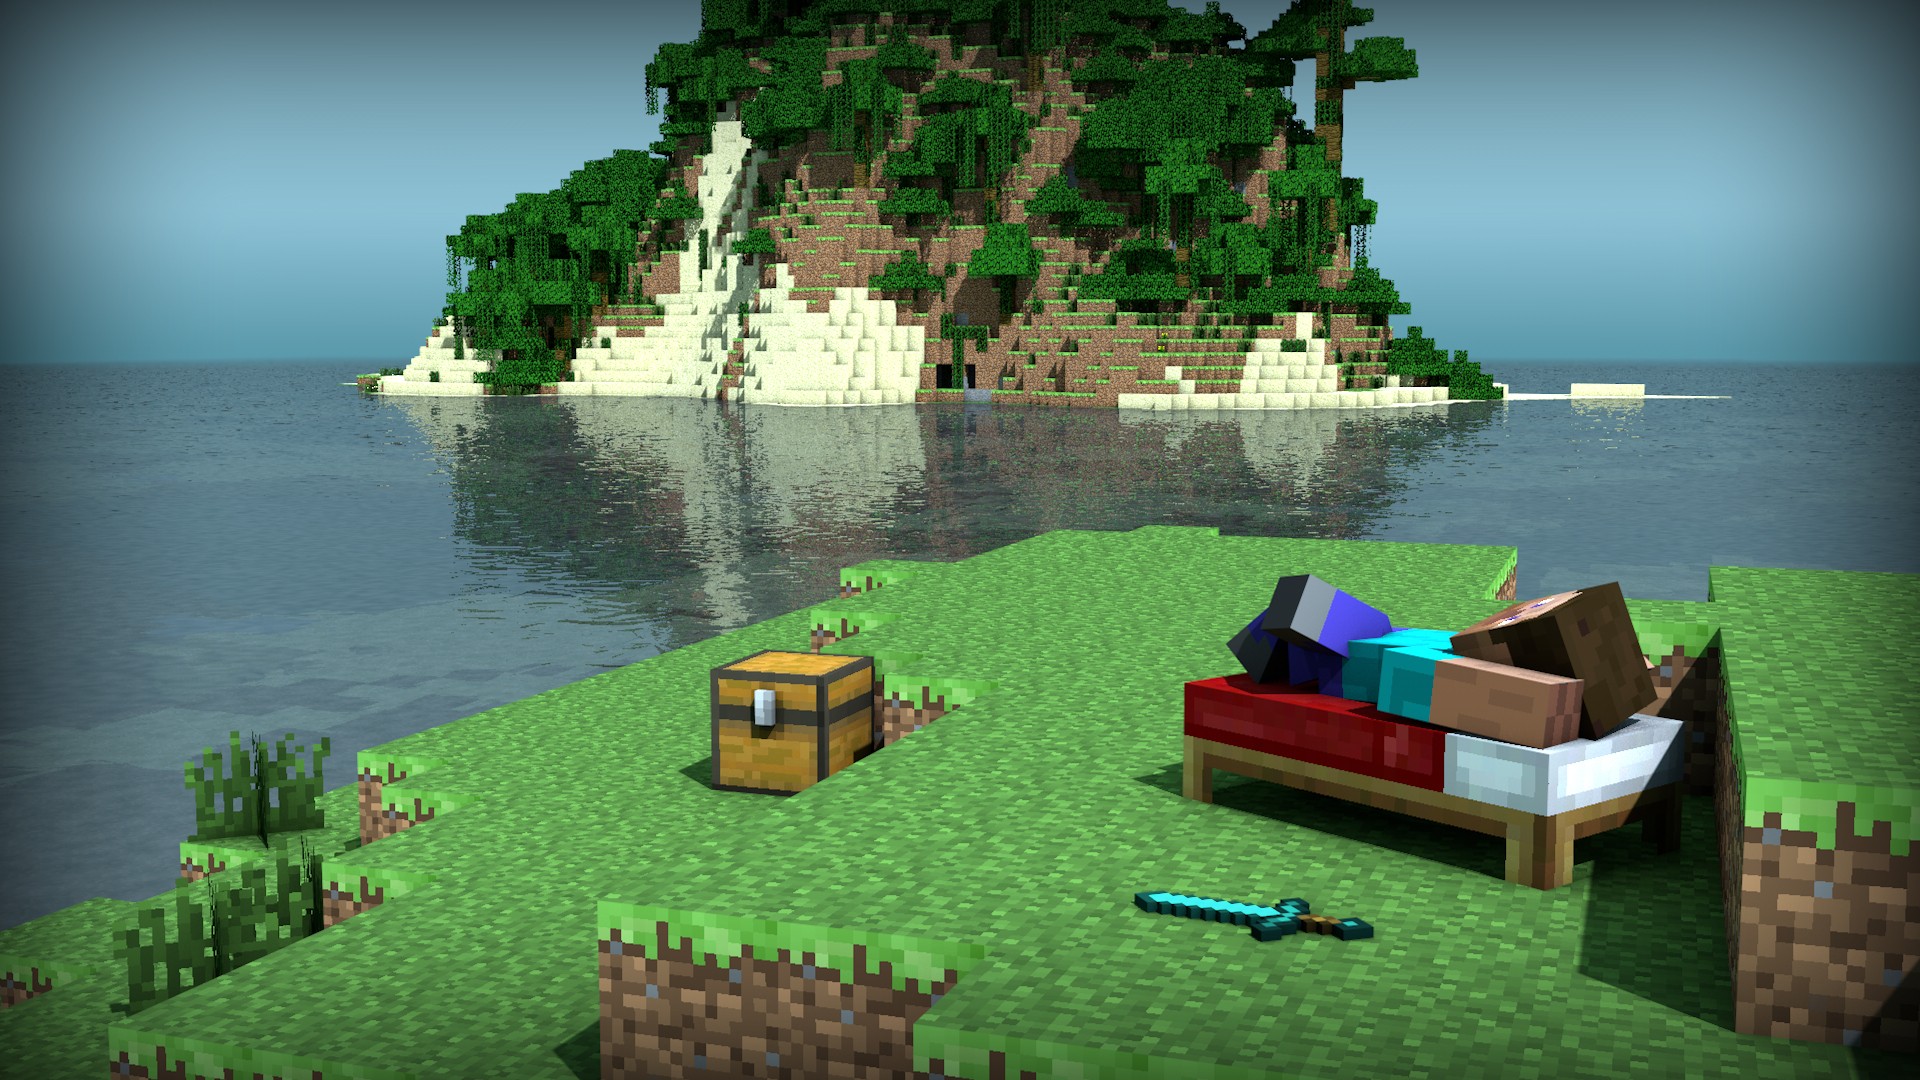 Minecraft Steve relaxing on a small island